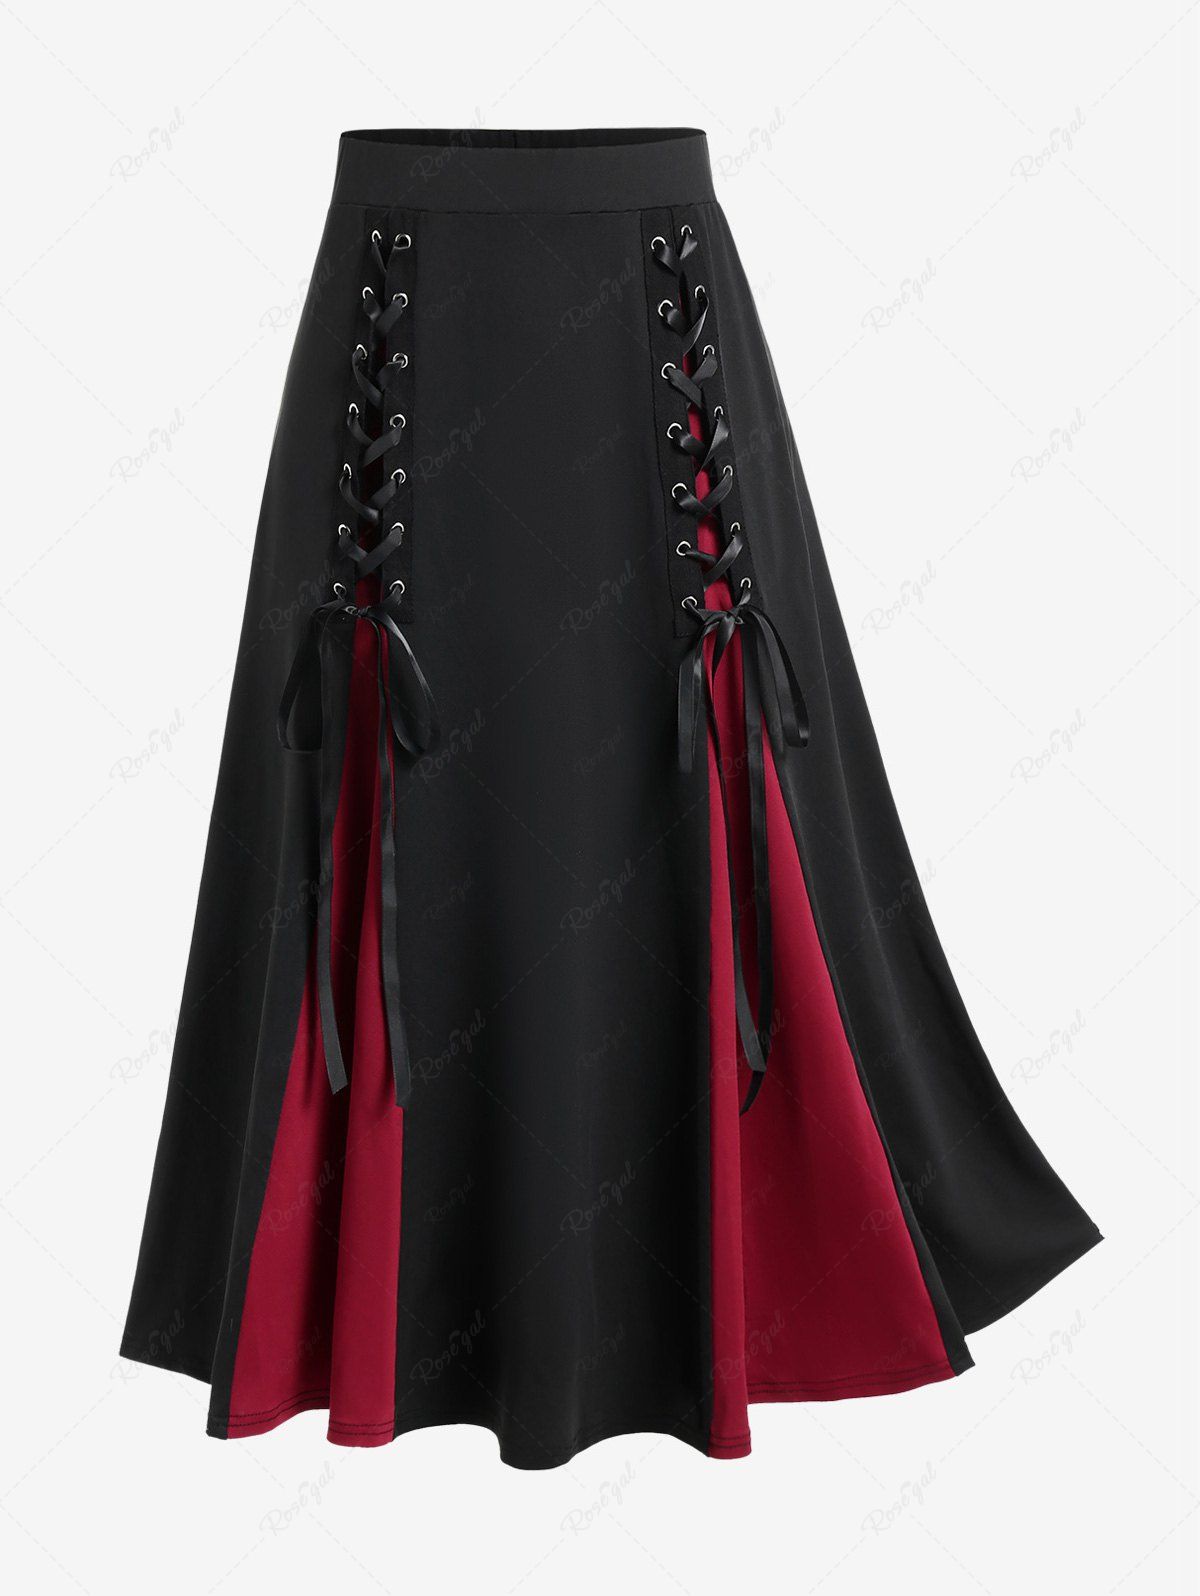 Fancy Gothic Lace Up Two Tone Godet Hem Midi A Line Victorian Walking Skirt  